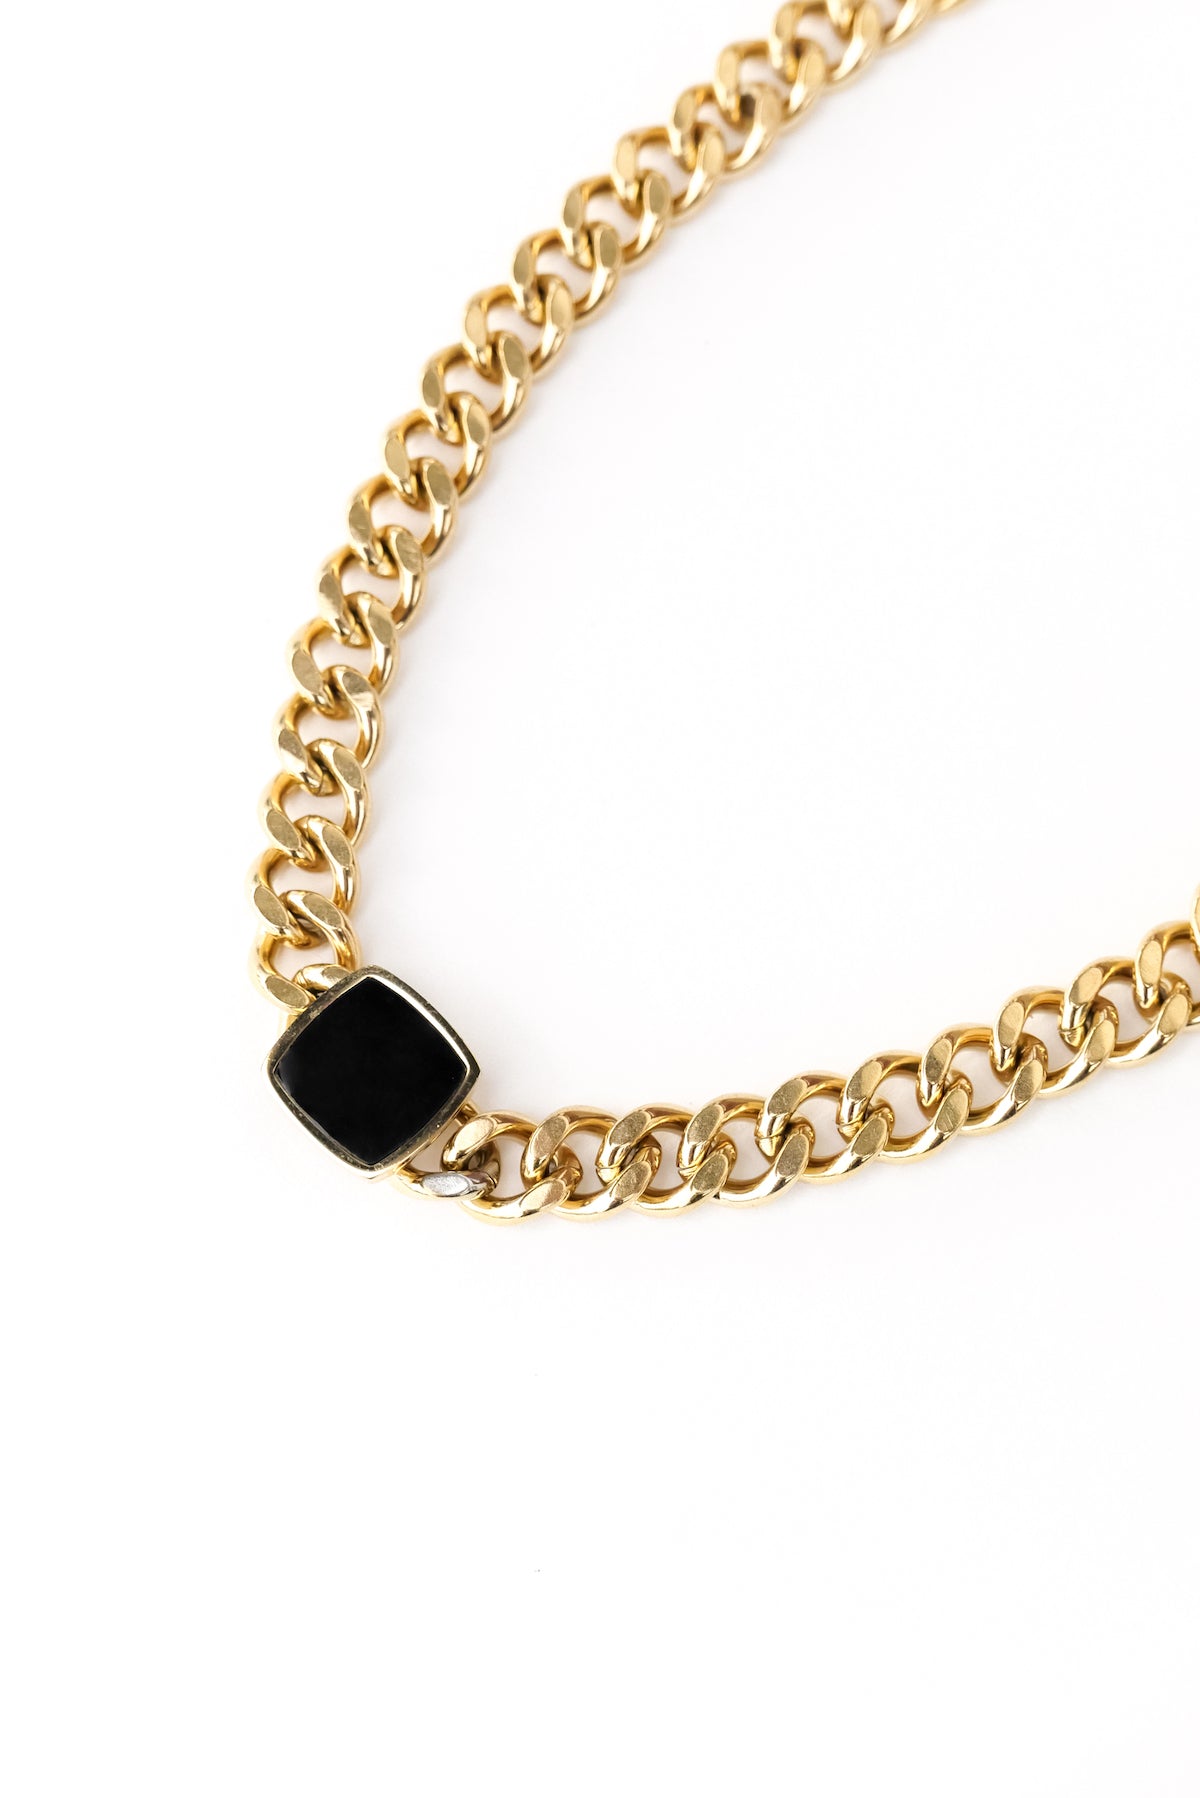 Zoomed in view of Gold Onyx Necklace